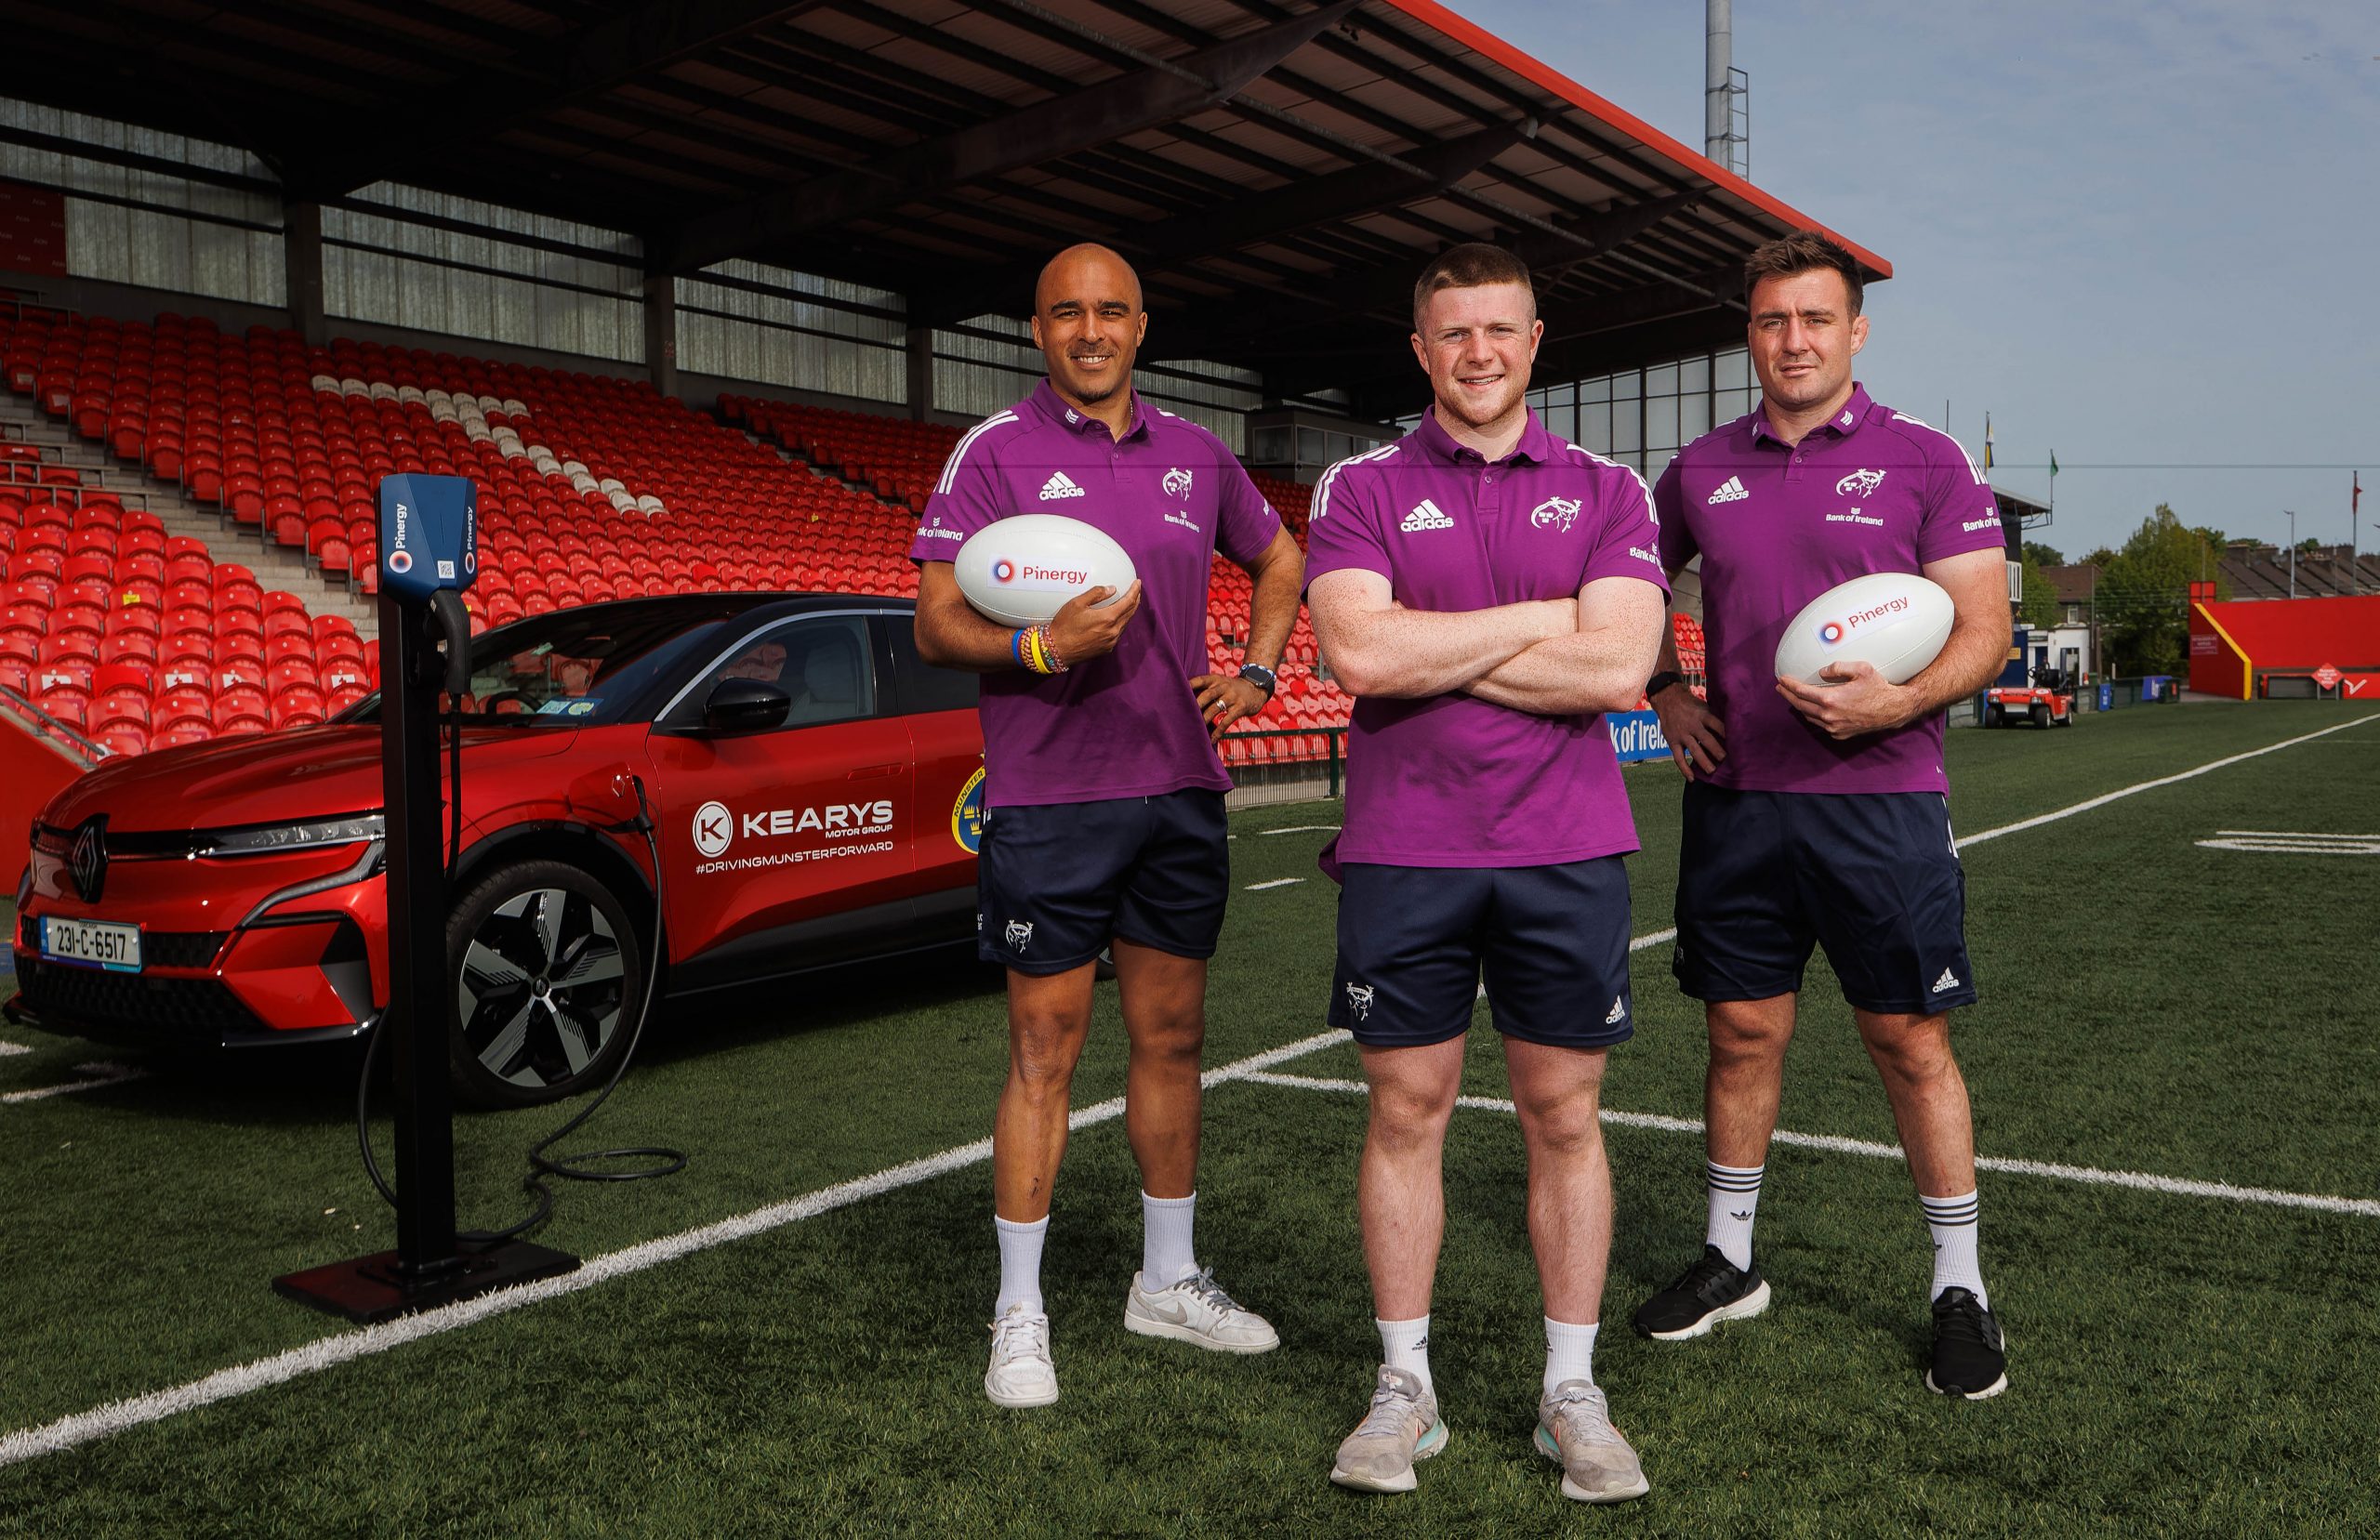 Pinergy & Kearys Driving An Electric Future For Munster Rugby